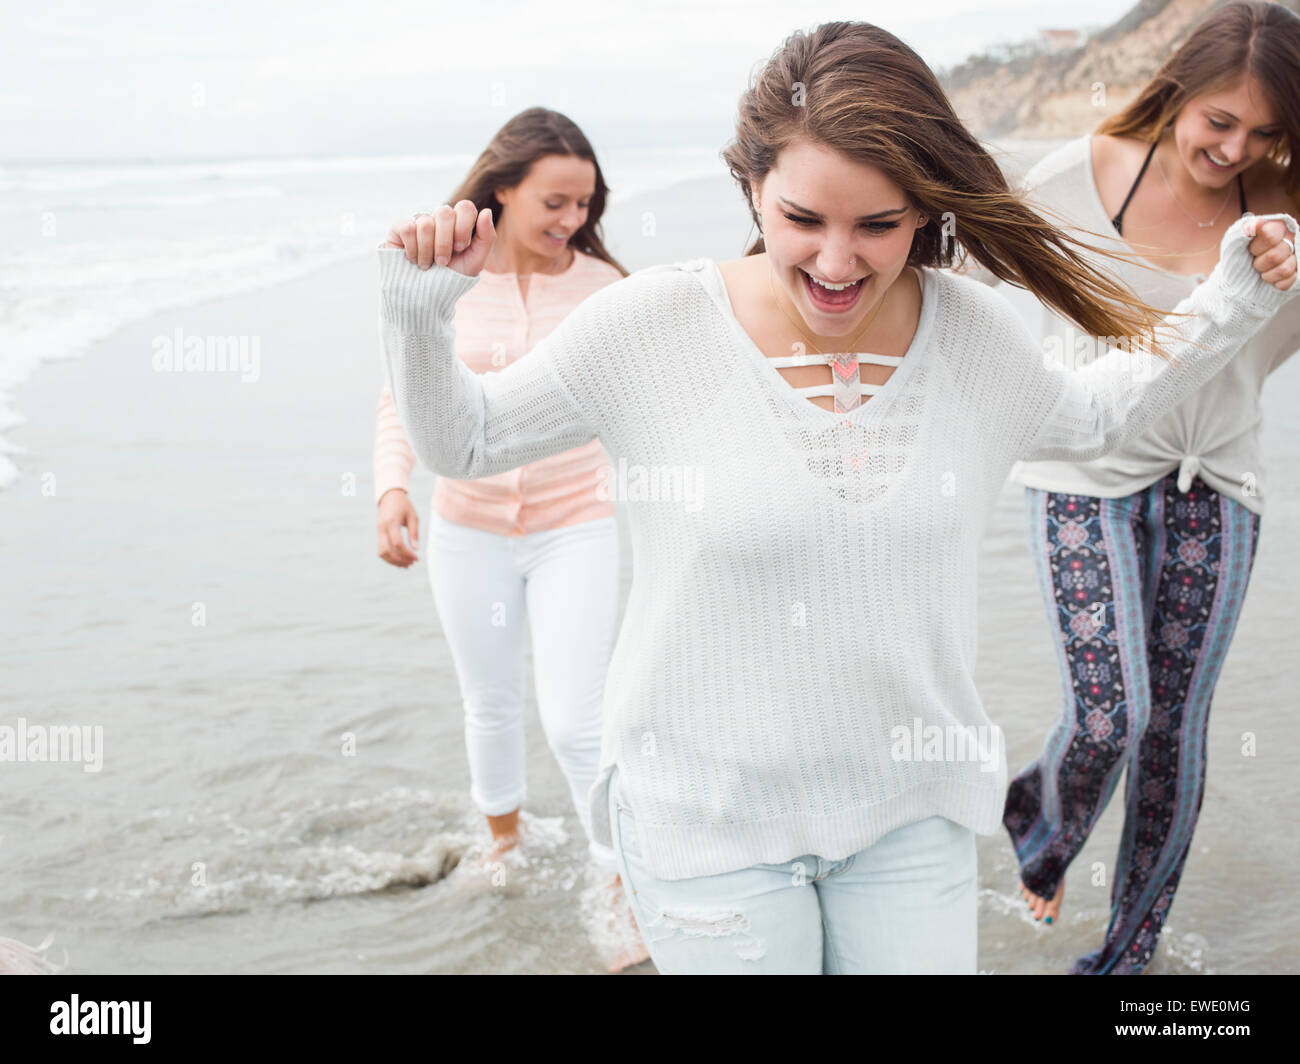 Trois smiling young women walking on a beach Banque D'Images